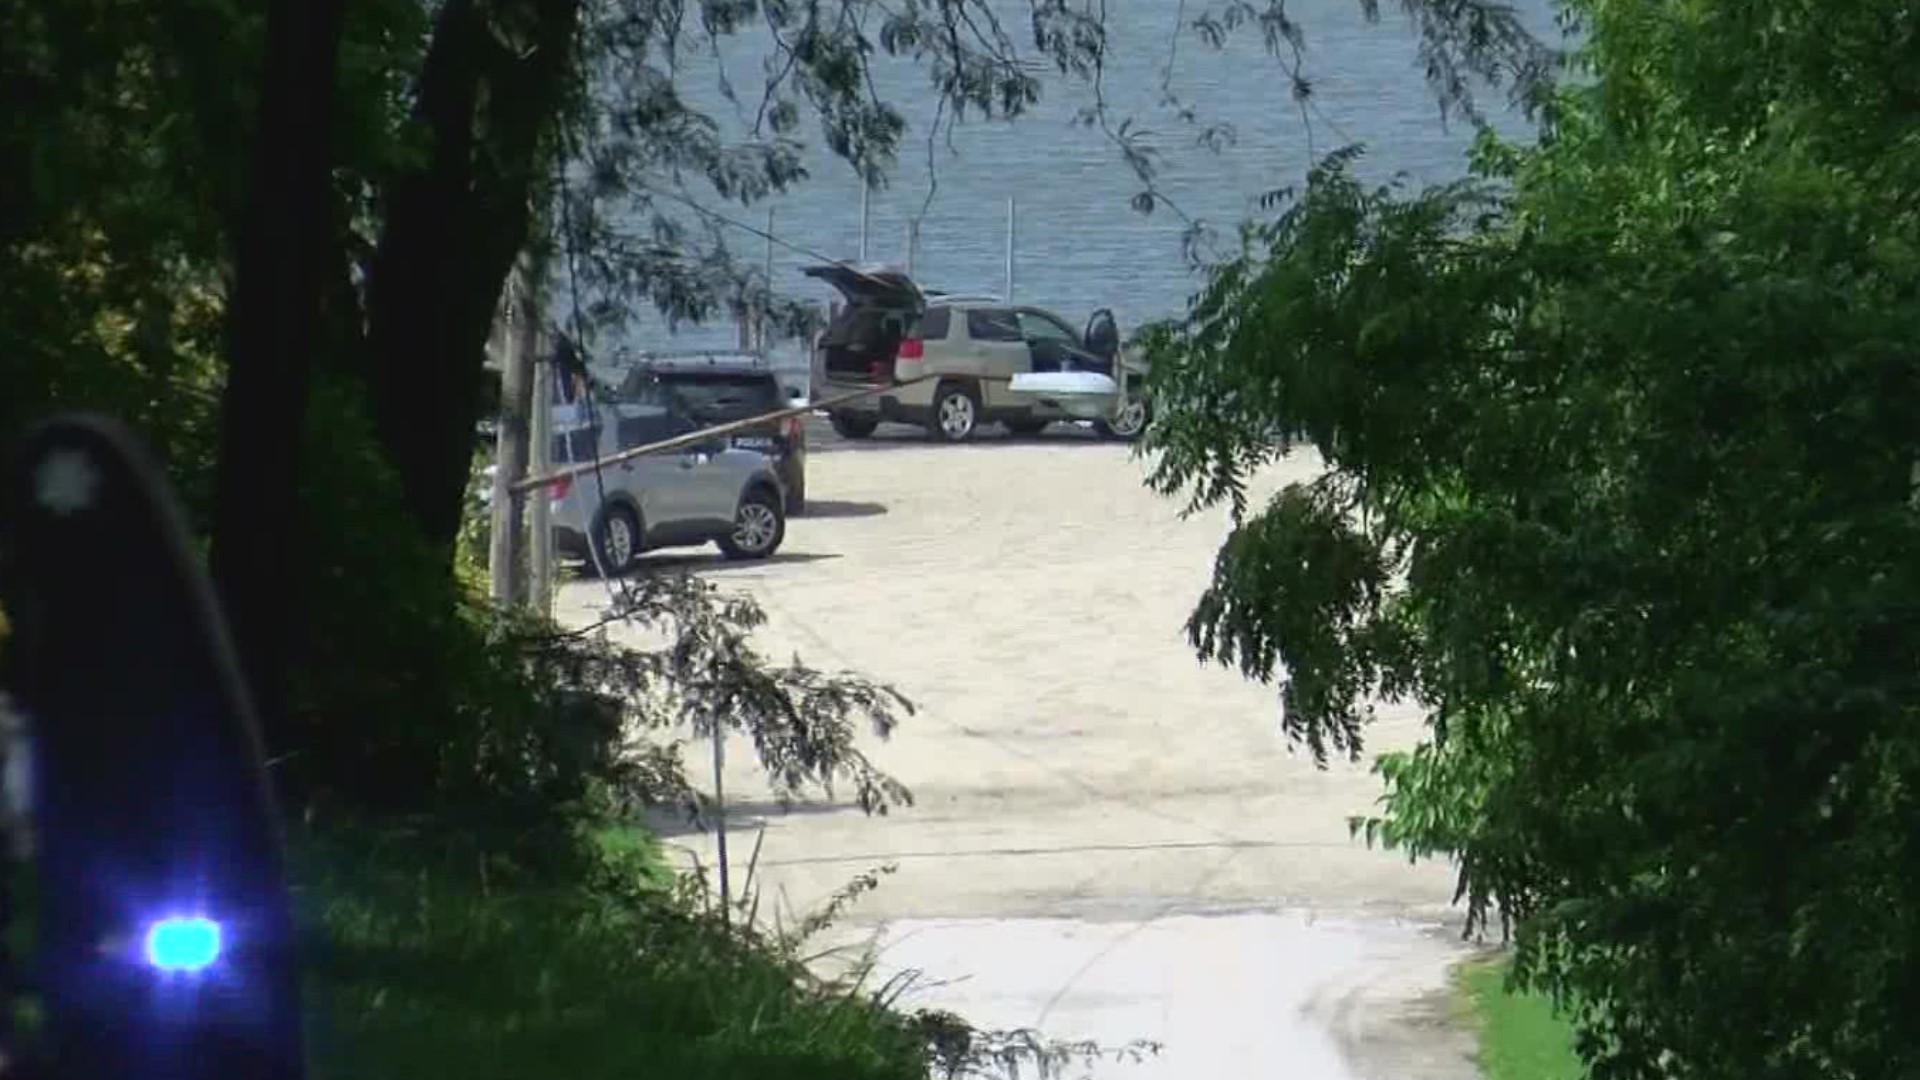 The 88-year-old was identified as Robert Stallter. His body was found in the water near the Maple Street Boat Launch docks in Perrysburg Monday afternoon.